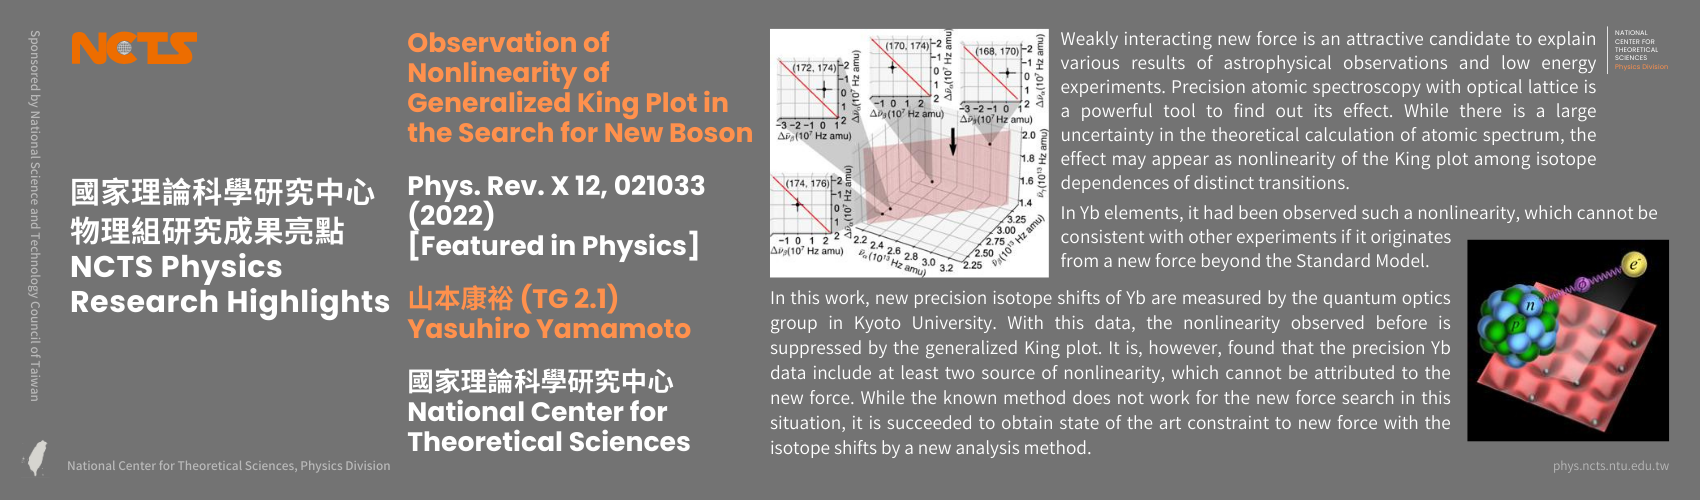 [NCTS Physics Research Highlights] Yasuhiro Yamamoto 'Observation of Nonlinearity of Generalized King Plot in the Search for New Boson', Phys. Rev. X 12, 021033 (2022)